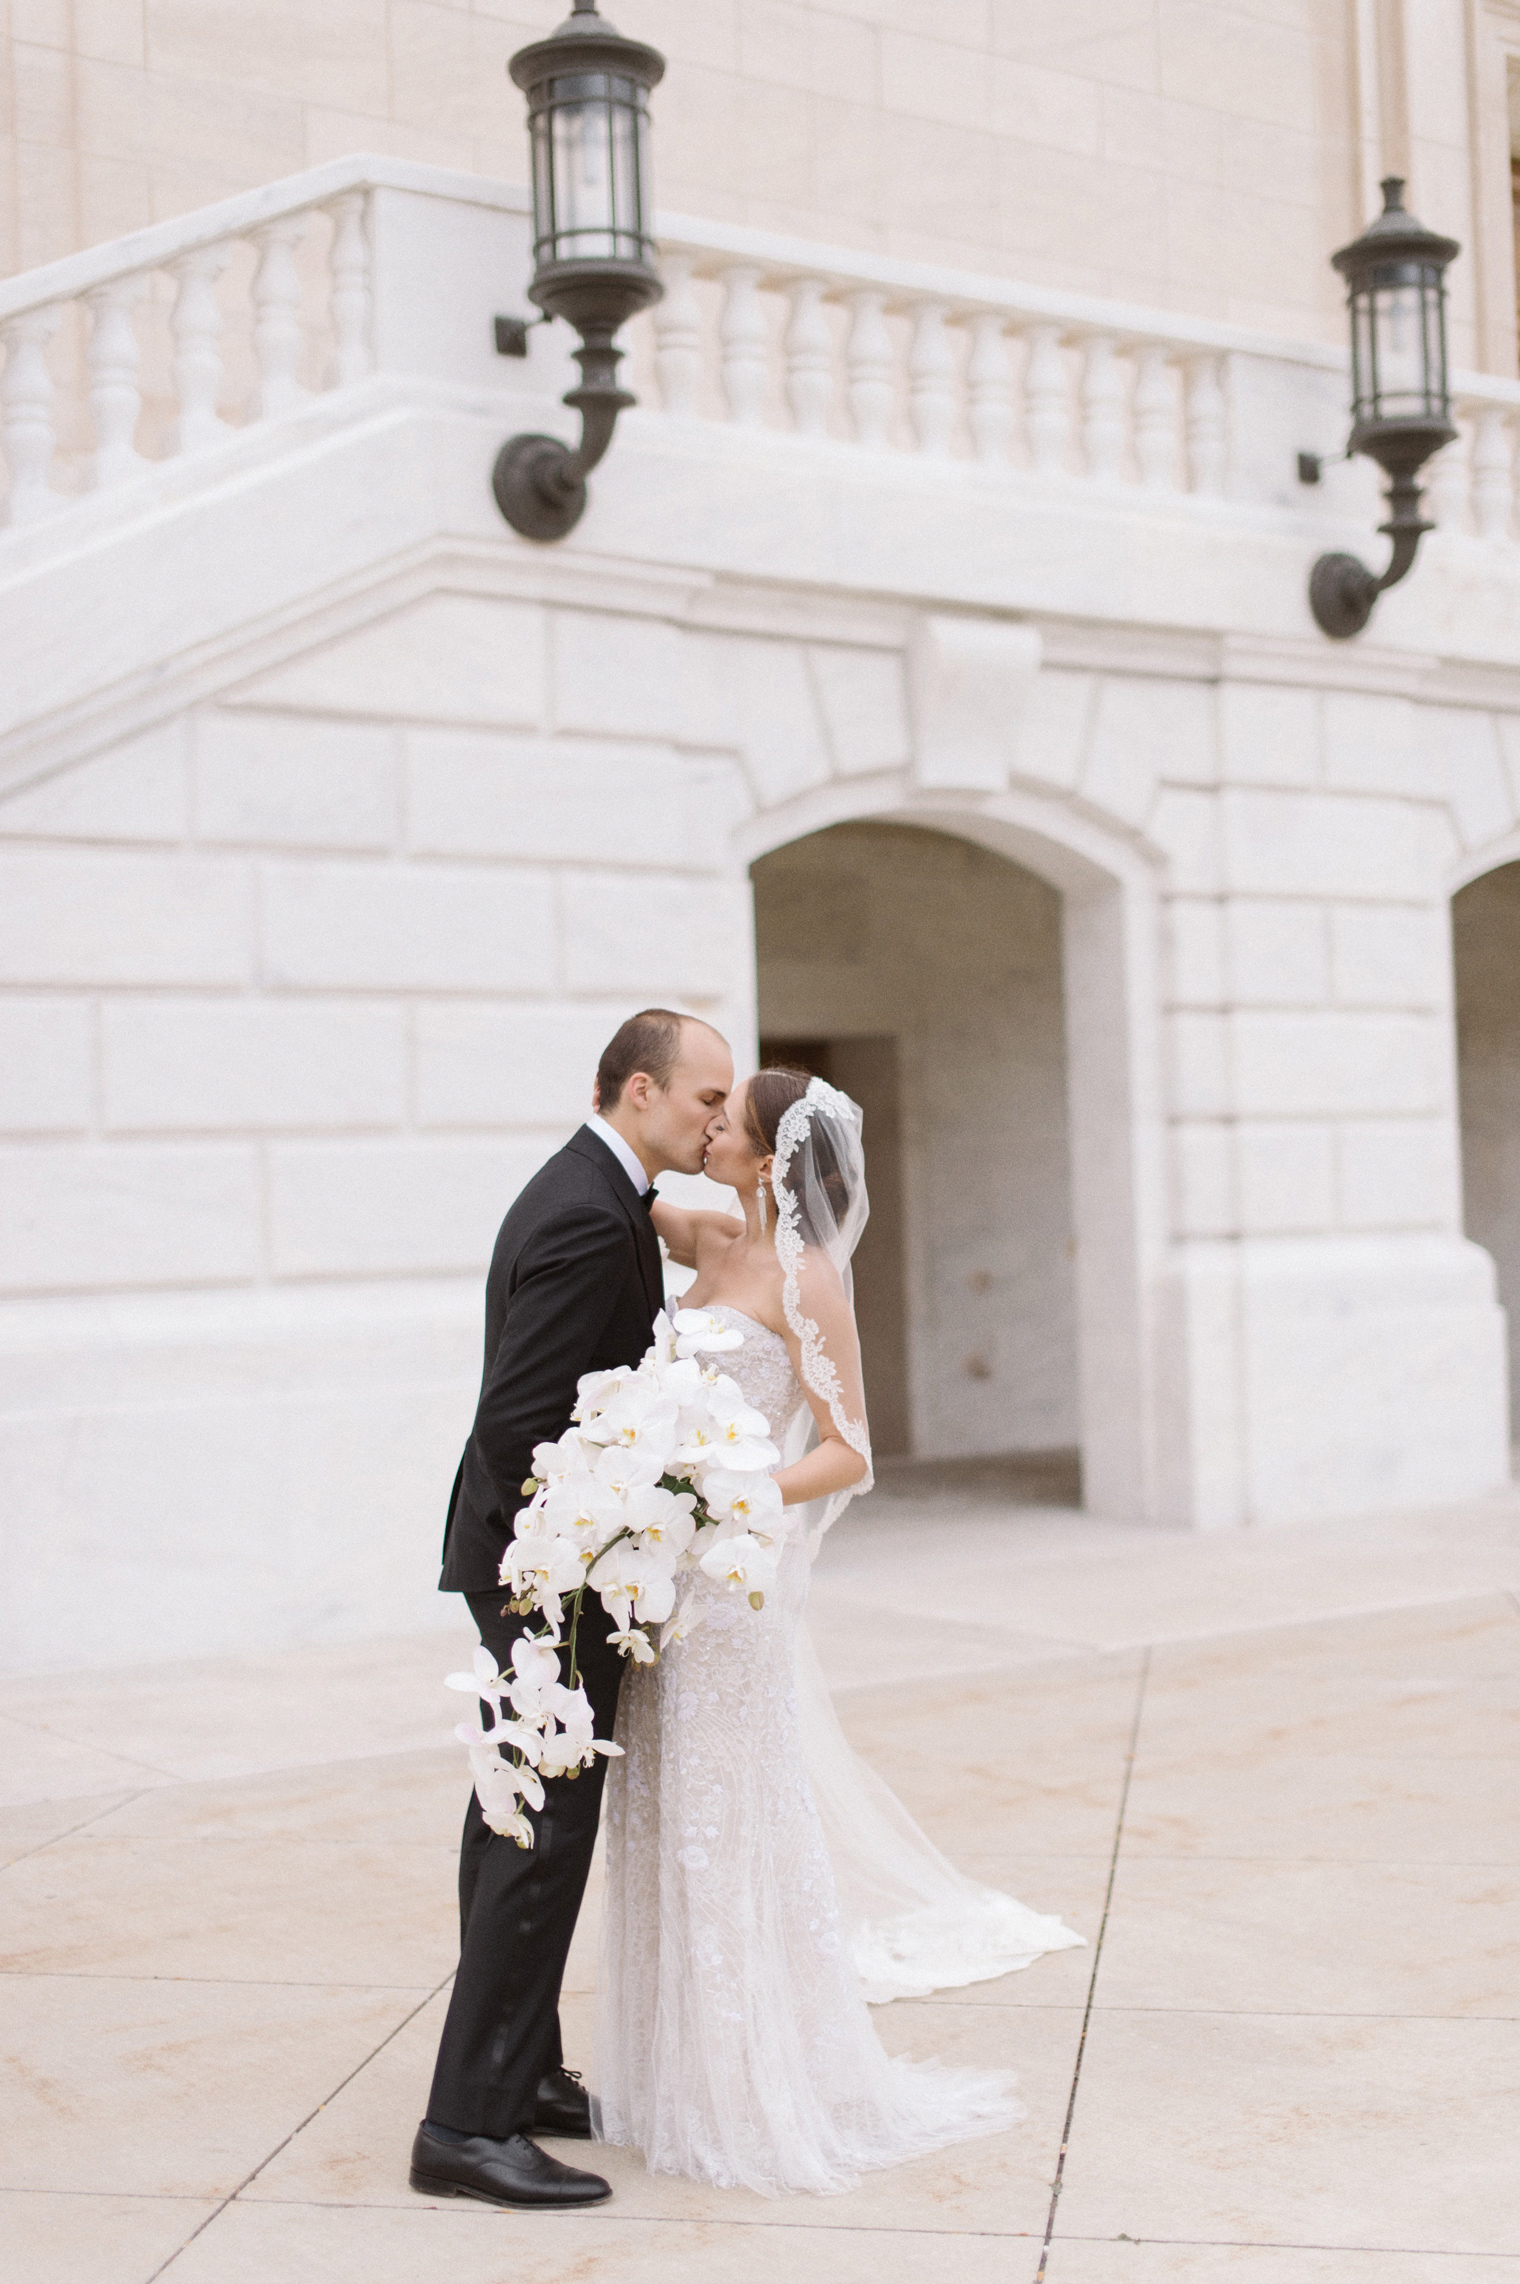 Timeless bride and groom portraits at the Detroit Institute of Arts by Wedding Photographer Heather Jowett.